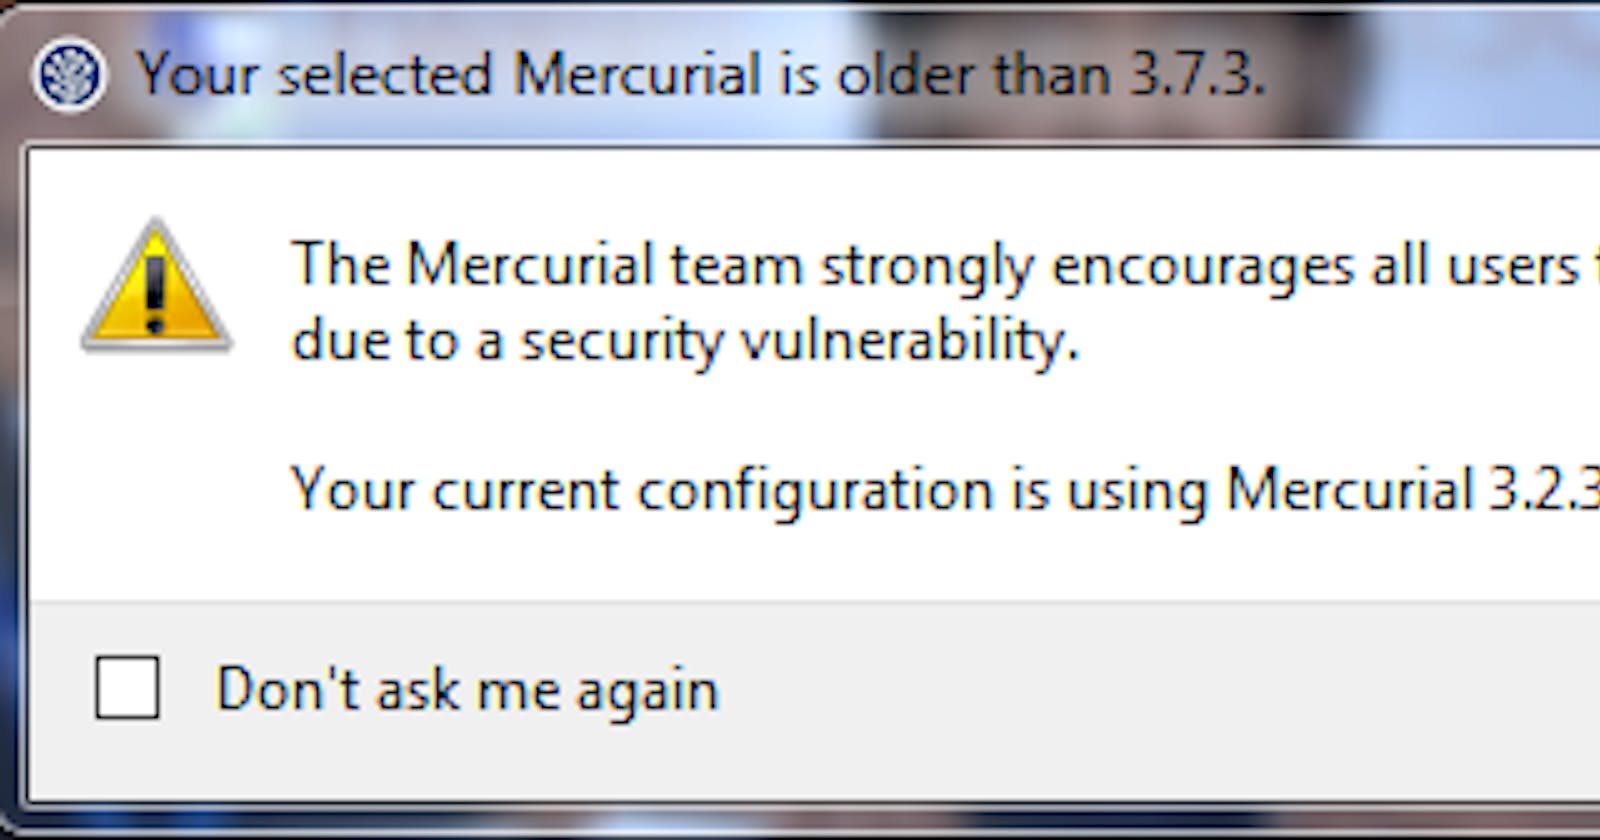 SourceTree Issue: The Mercurial team strongly encourages all users to upgrade to 3.7.3 due to security vulnerability